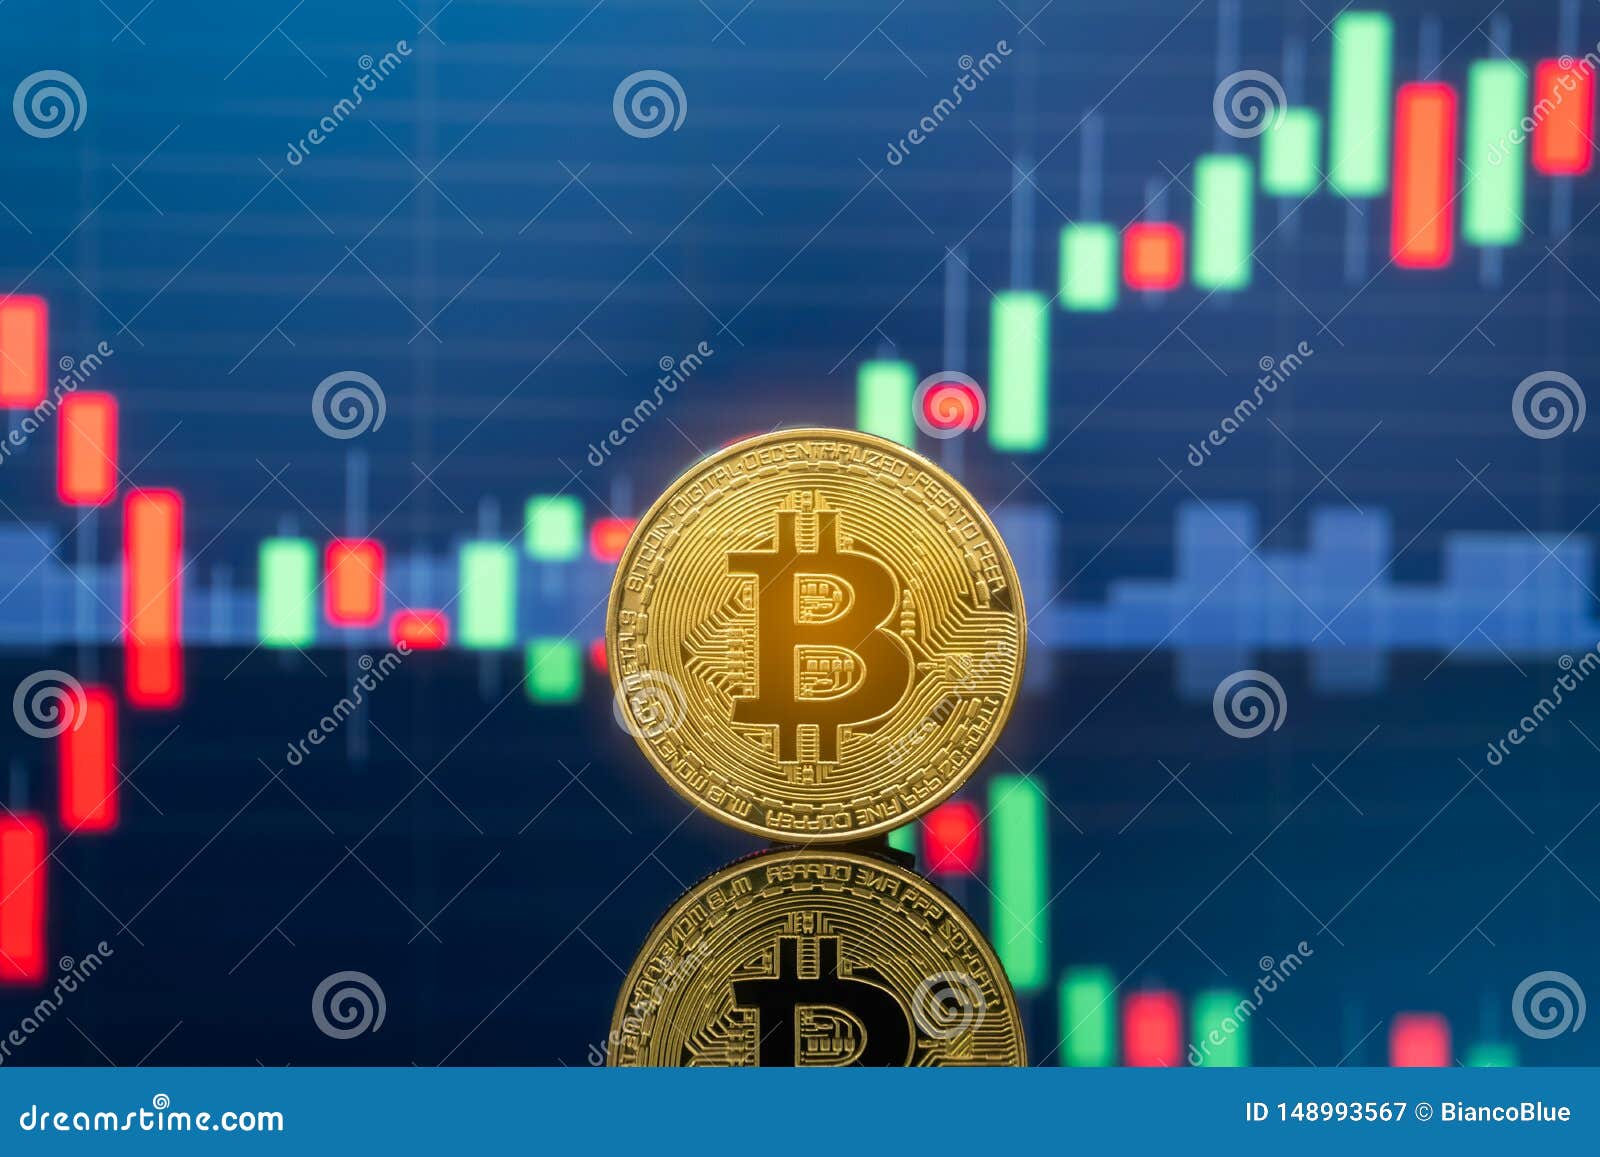 Bitcoin And Cryptocurrency Investing Concept Stock Image ...